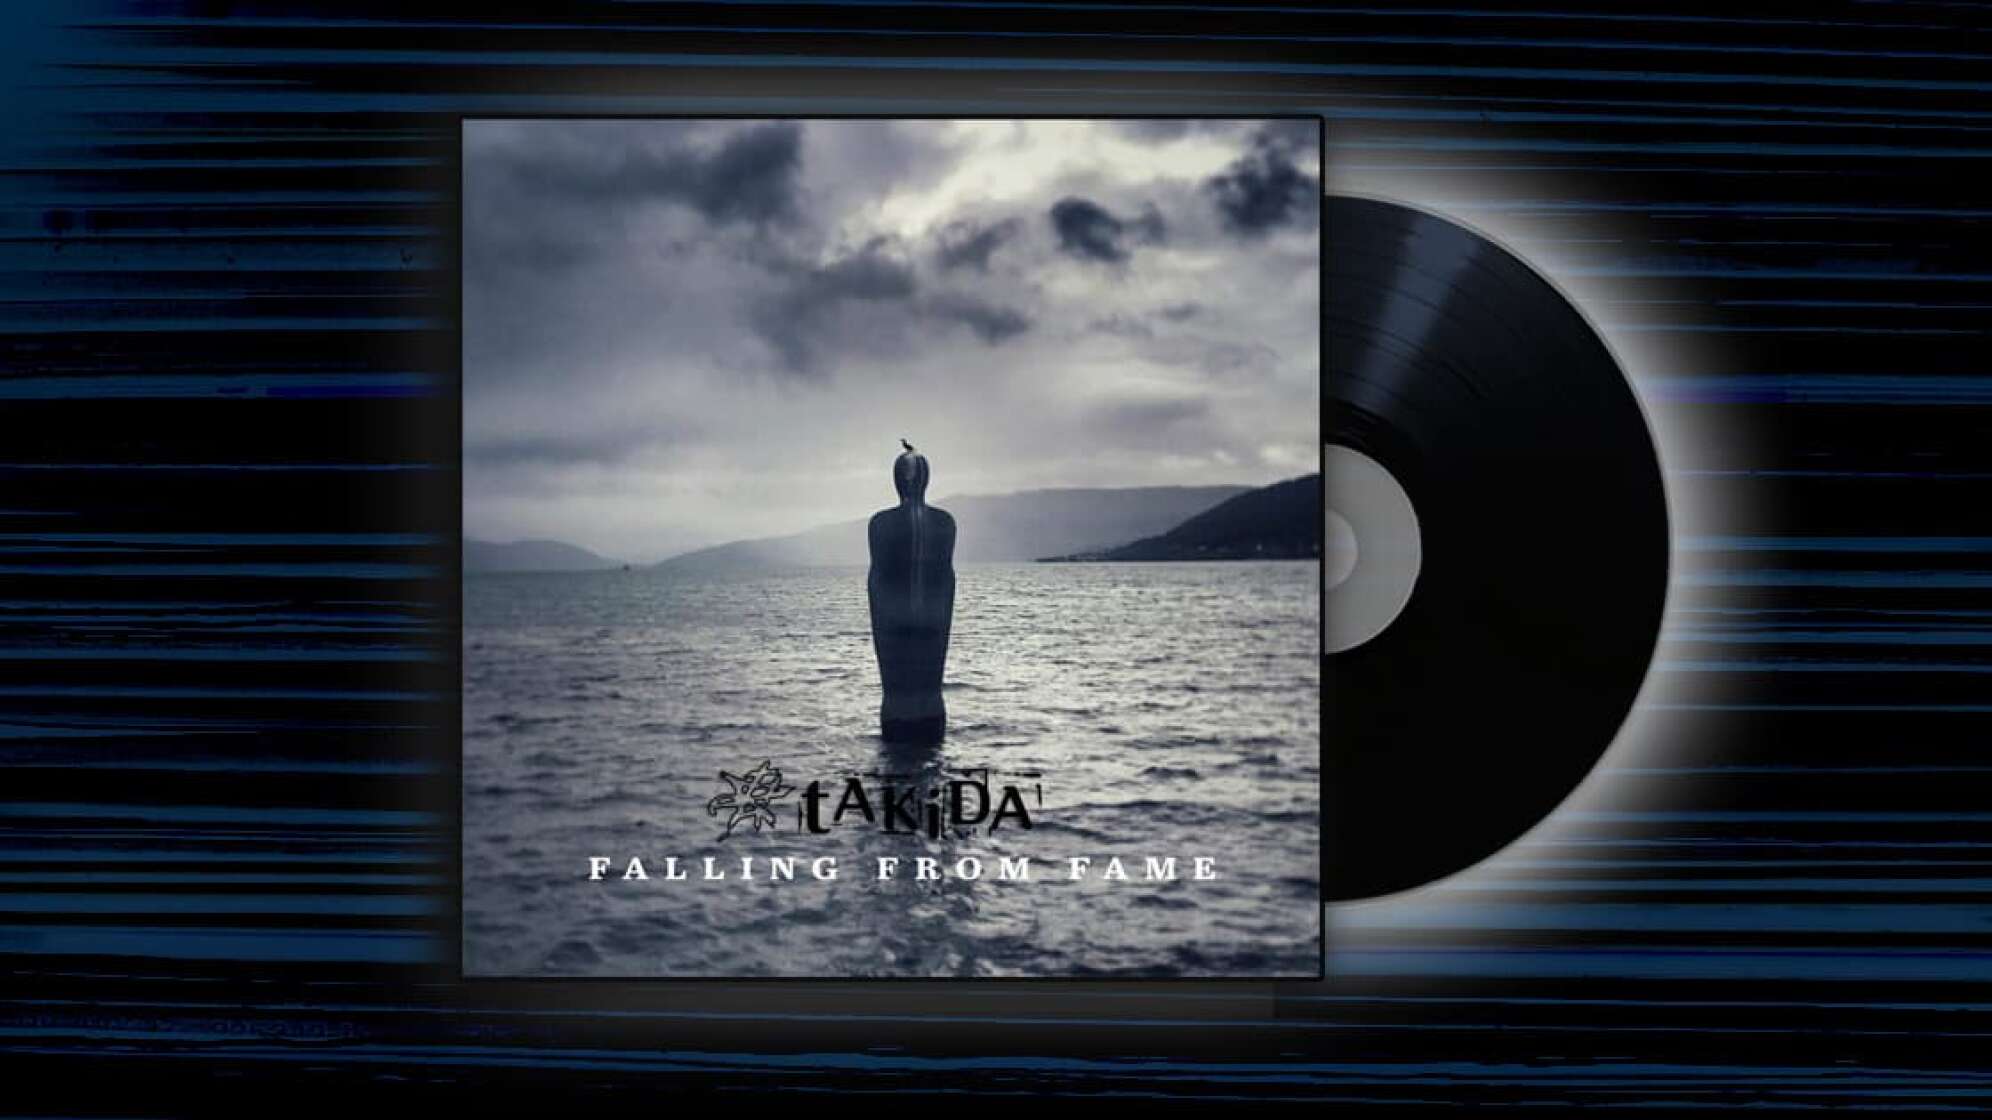 Albumcover von Takida Falling From Fame